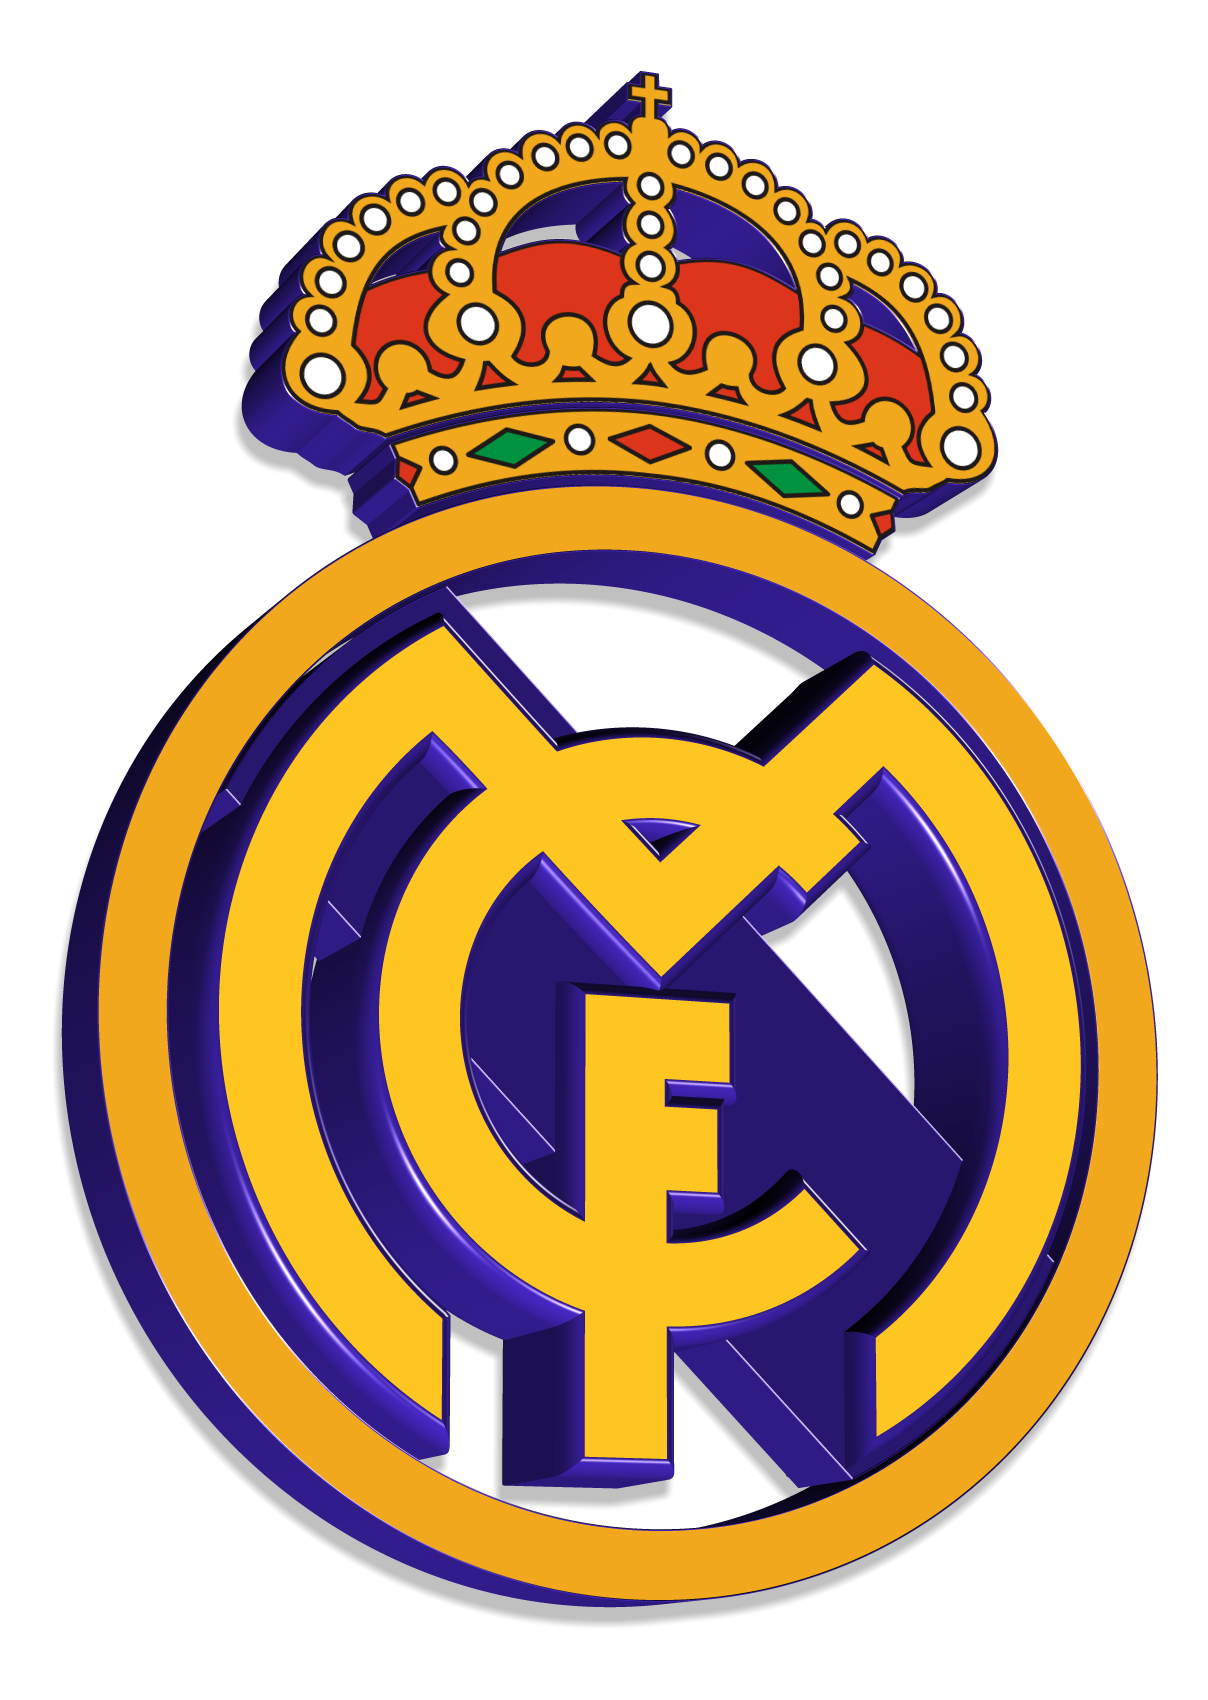 Real Madrid Wallpapers Images Photos Pictures Backgrounds